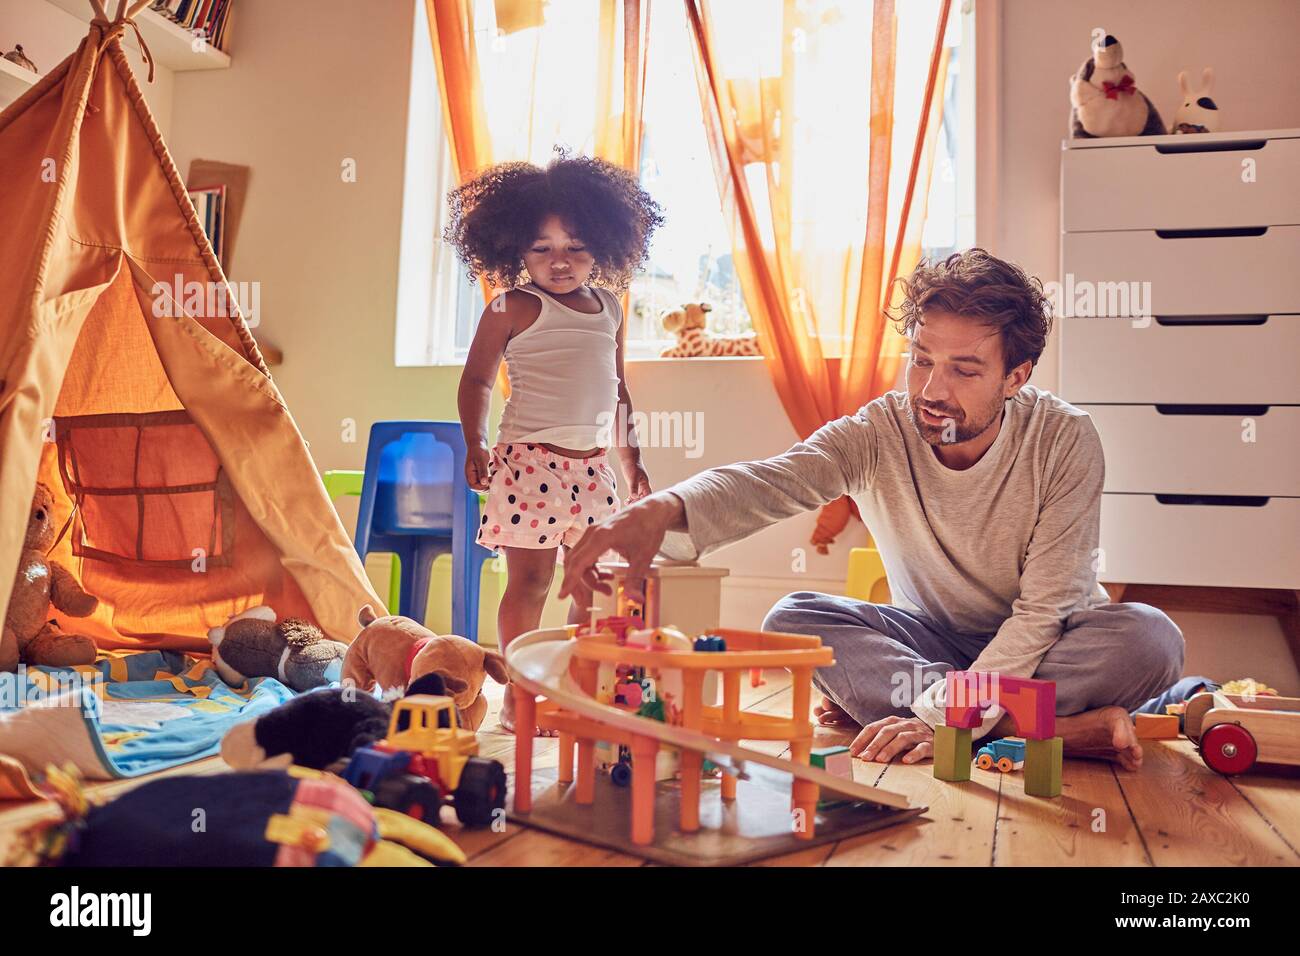 Father and daughter playing with toys on floor Stock Photo